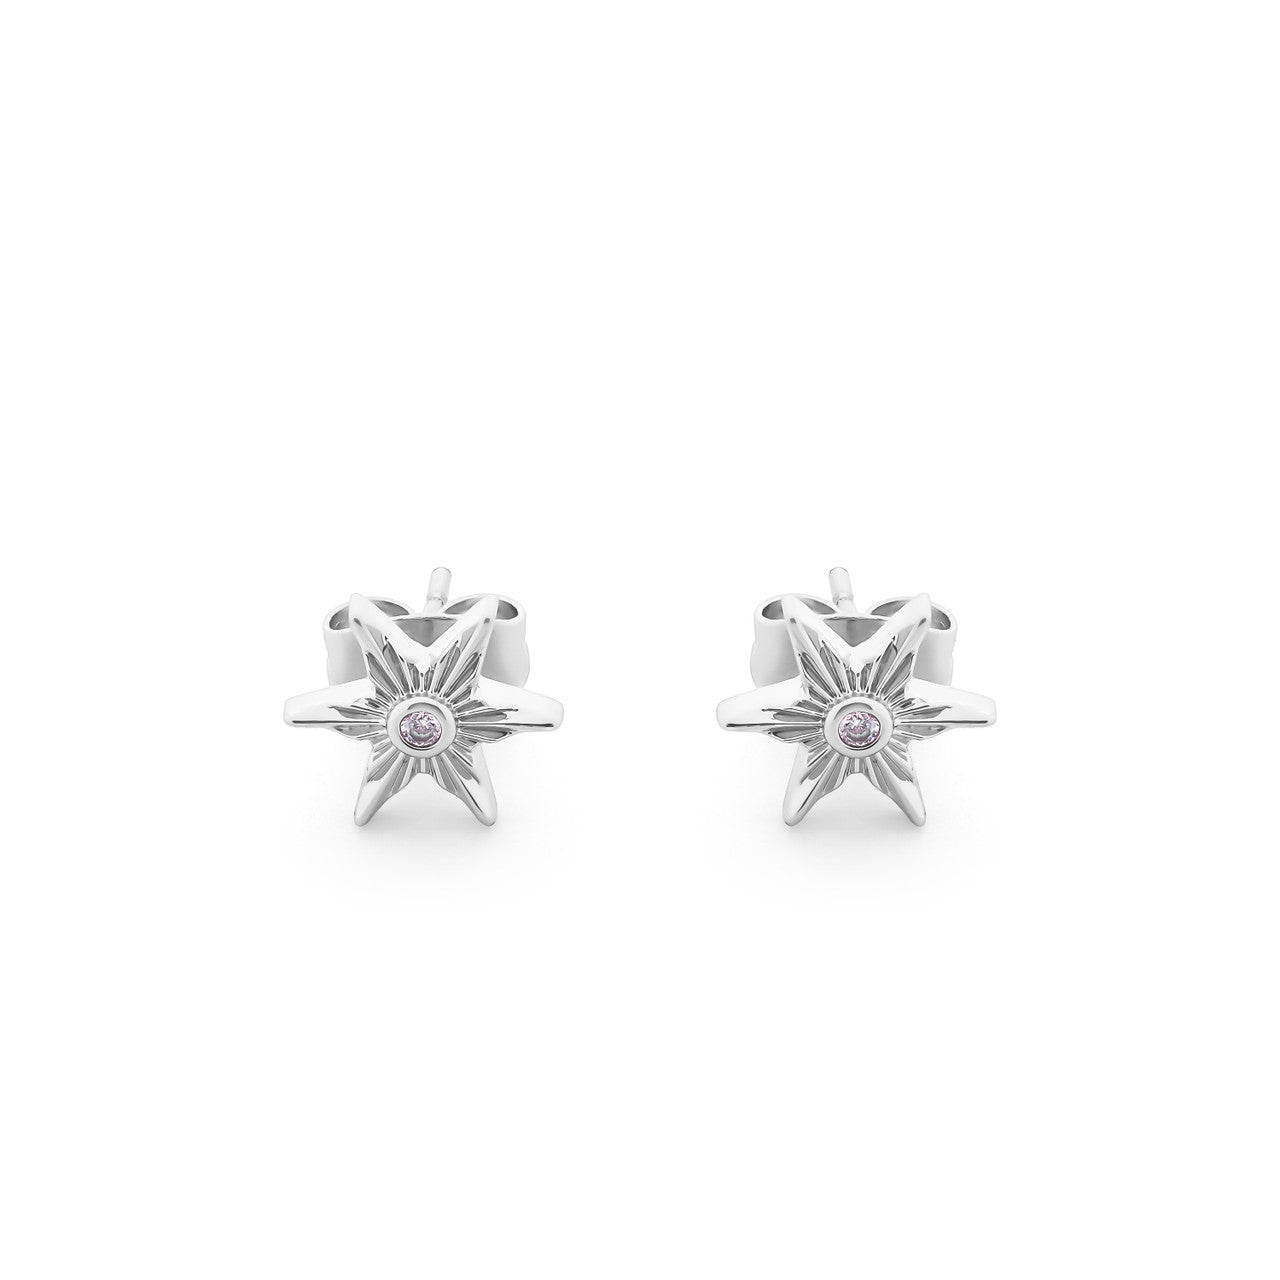 Tipperary Crystal Earrings - Star Collection - Star Compass Gold/Siver/Rose Gold